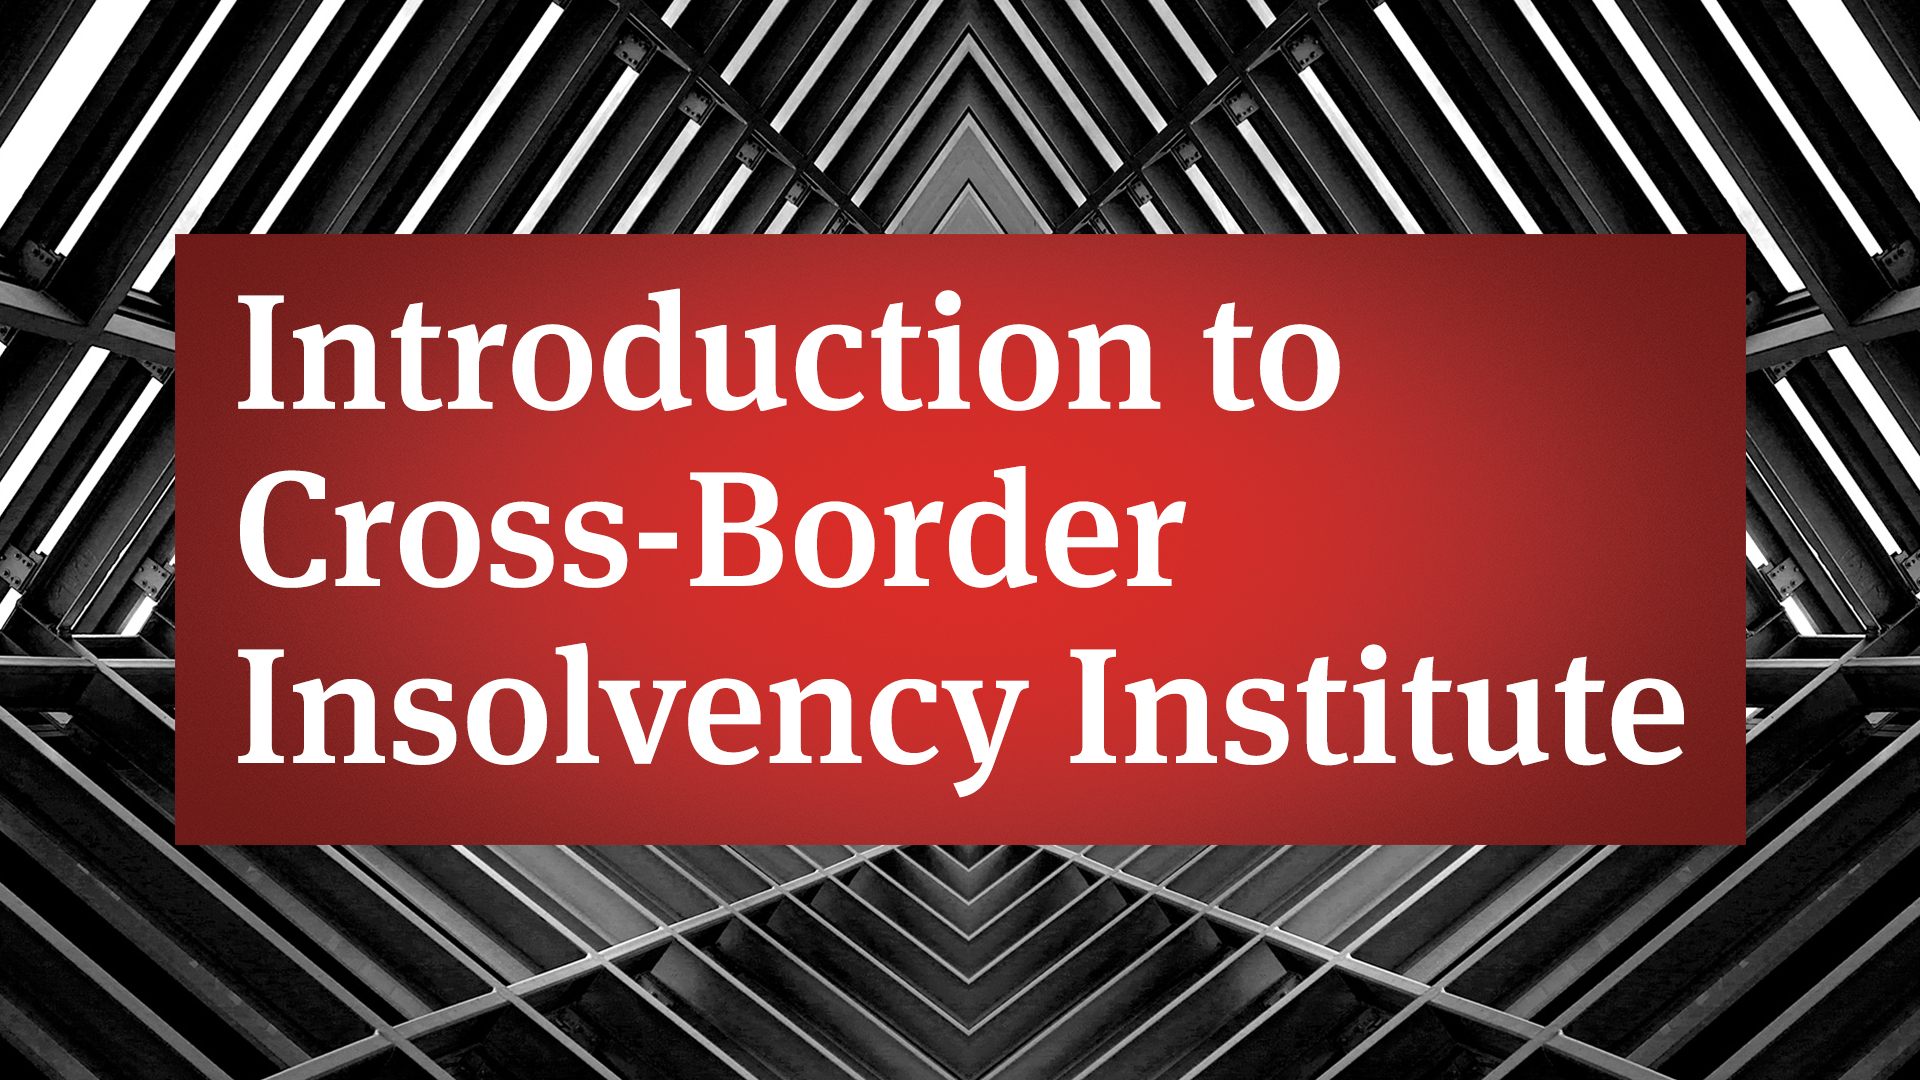 Introduction to Cross-Border Insolvency Institute